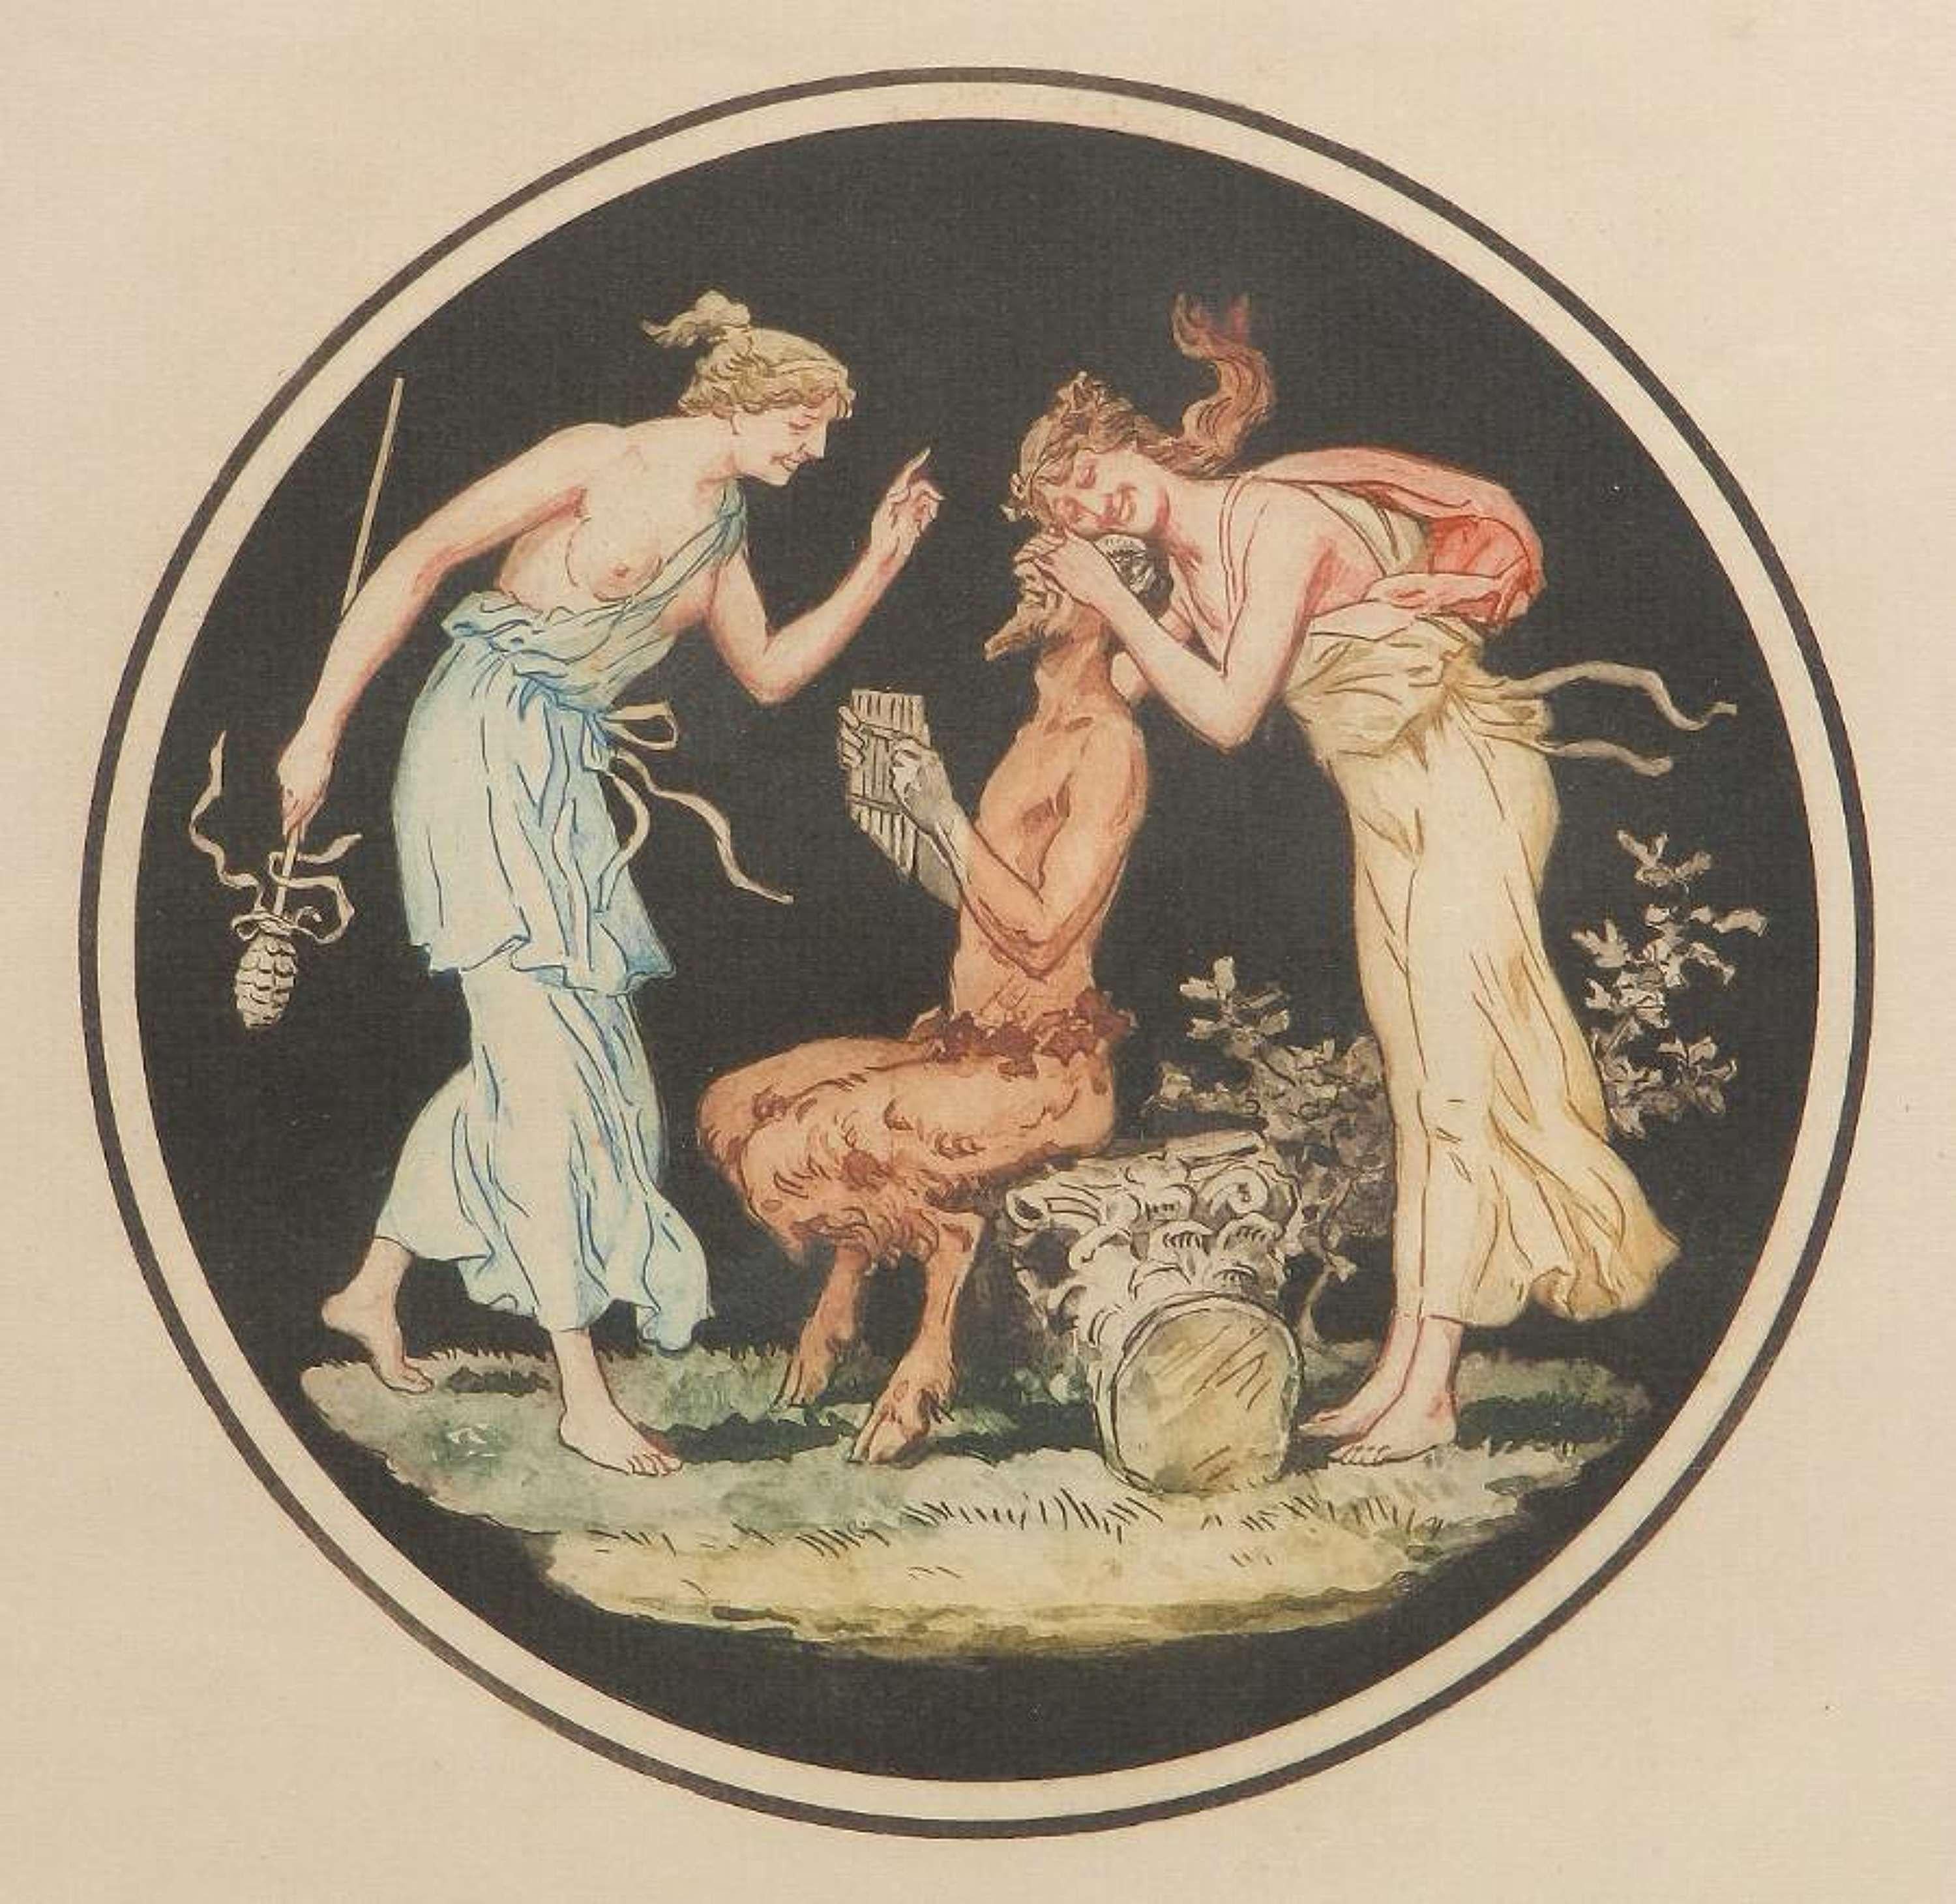 Unknown Figurative Print - Engraving Pan Nymphs after Jean Guillaume Moitte Allegorical Decorative Print 